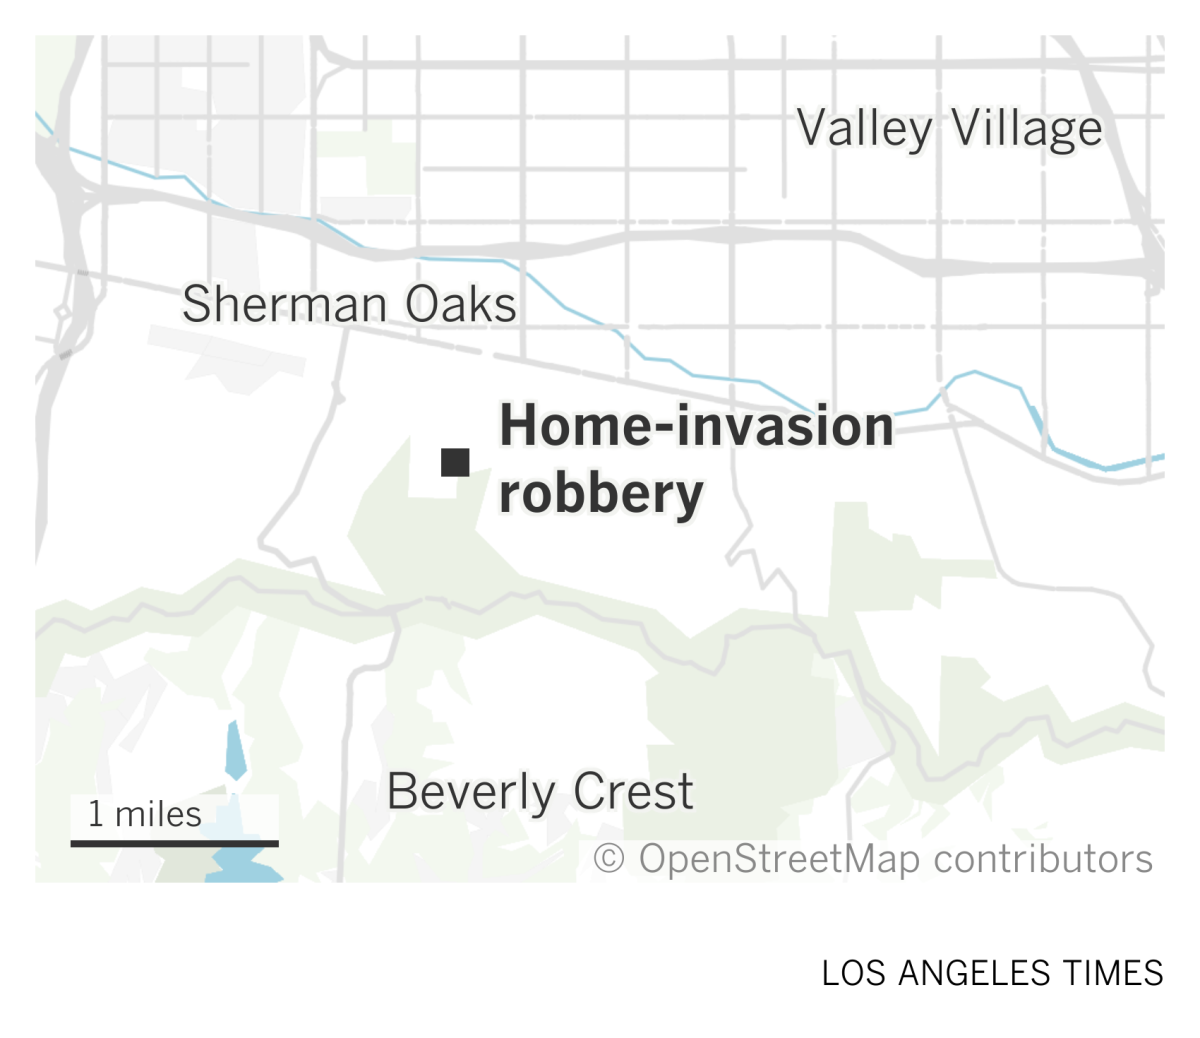 A map of the San Fernando Valley showing the site of a home-invasion robbery near Sherman Oaks